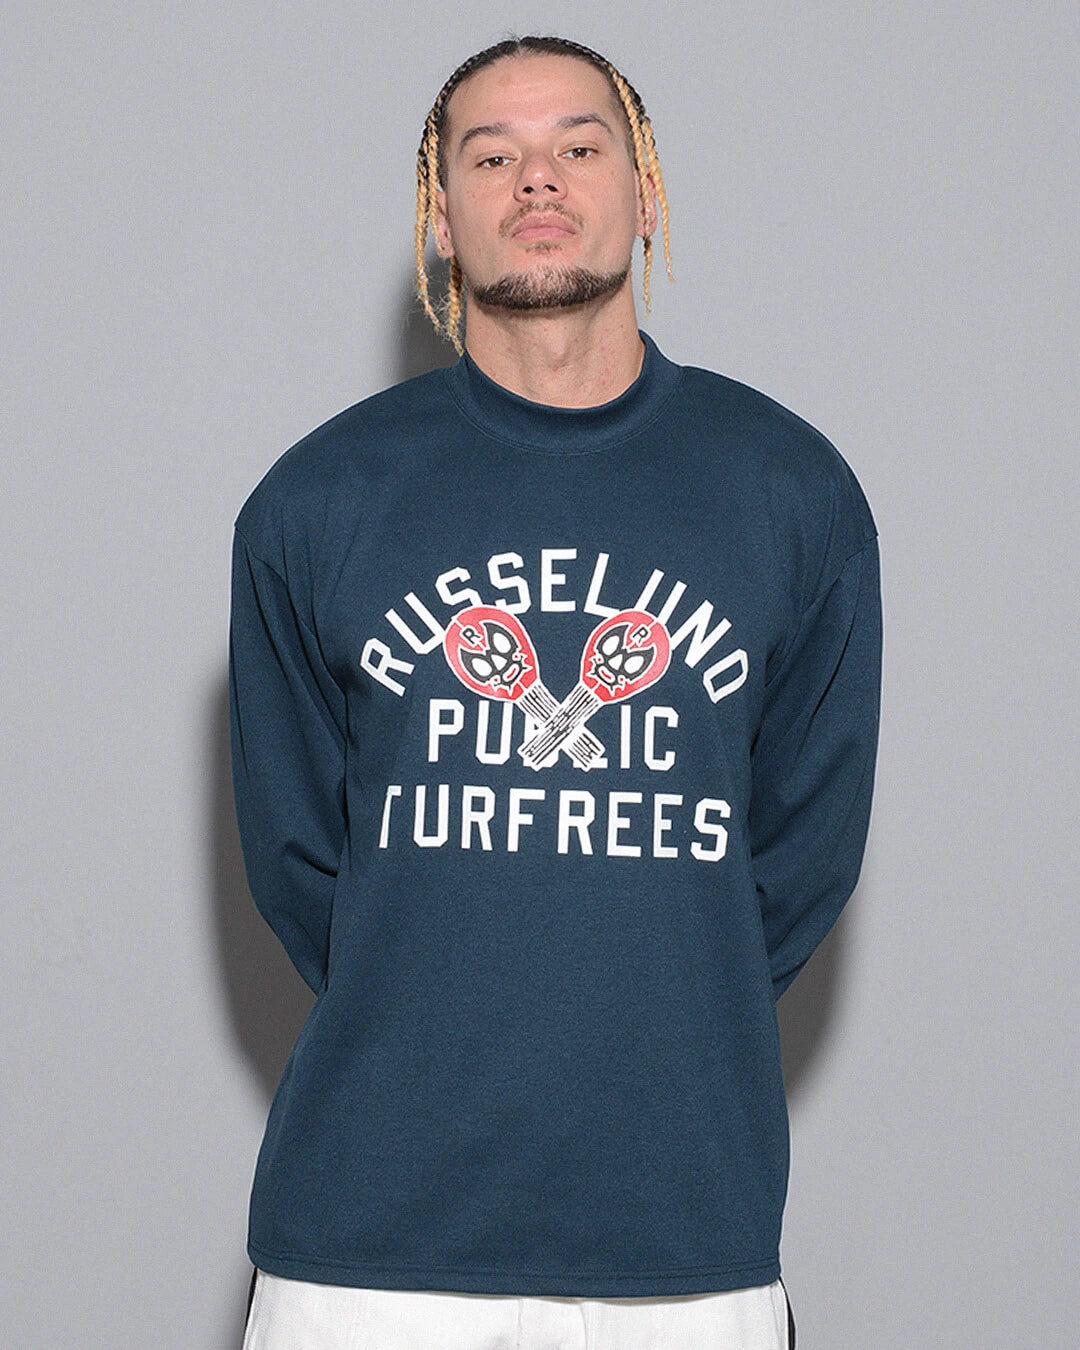 RUSSELUNO TURFREES LOOSE FIT MOCKNECKエピック